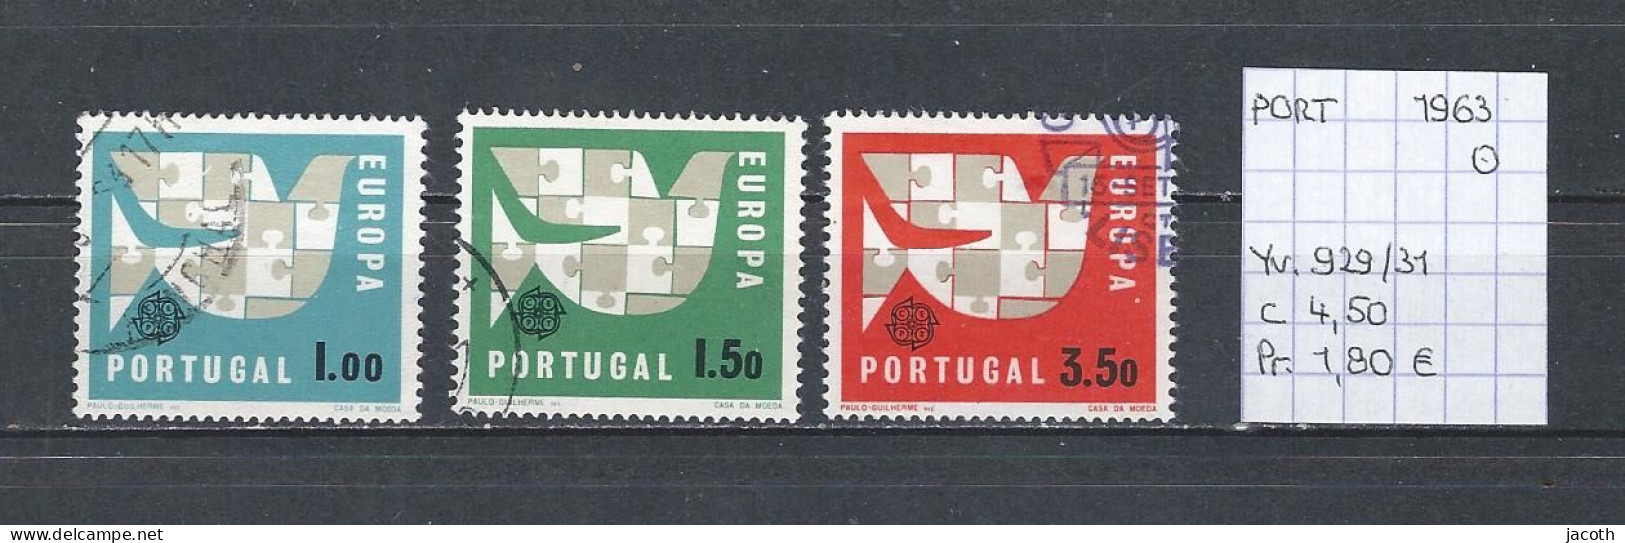 (TJ) Europa CEPT 1963 - Portugal YT 929/31 (gest./obl./used) - 1963